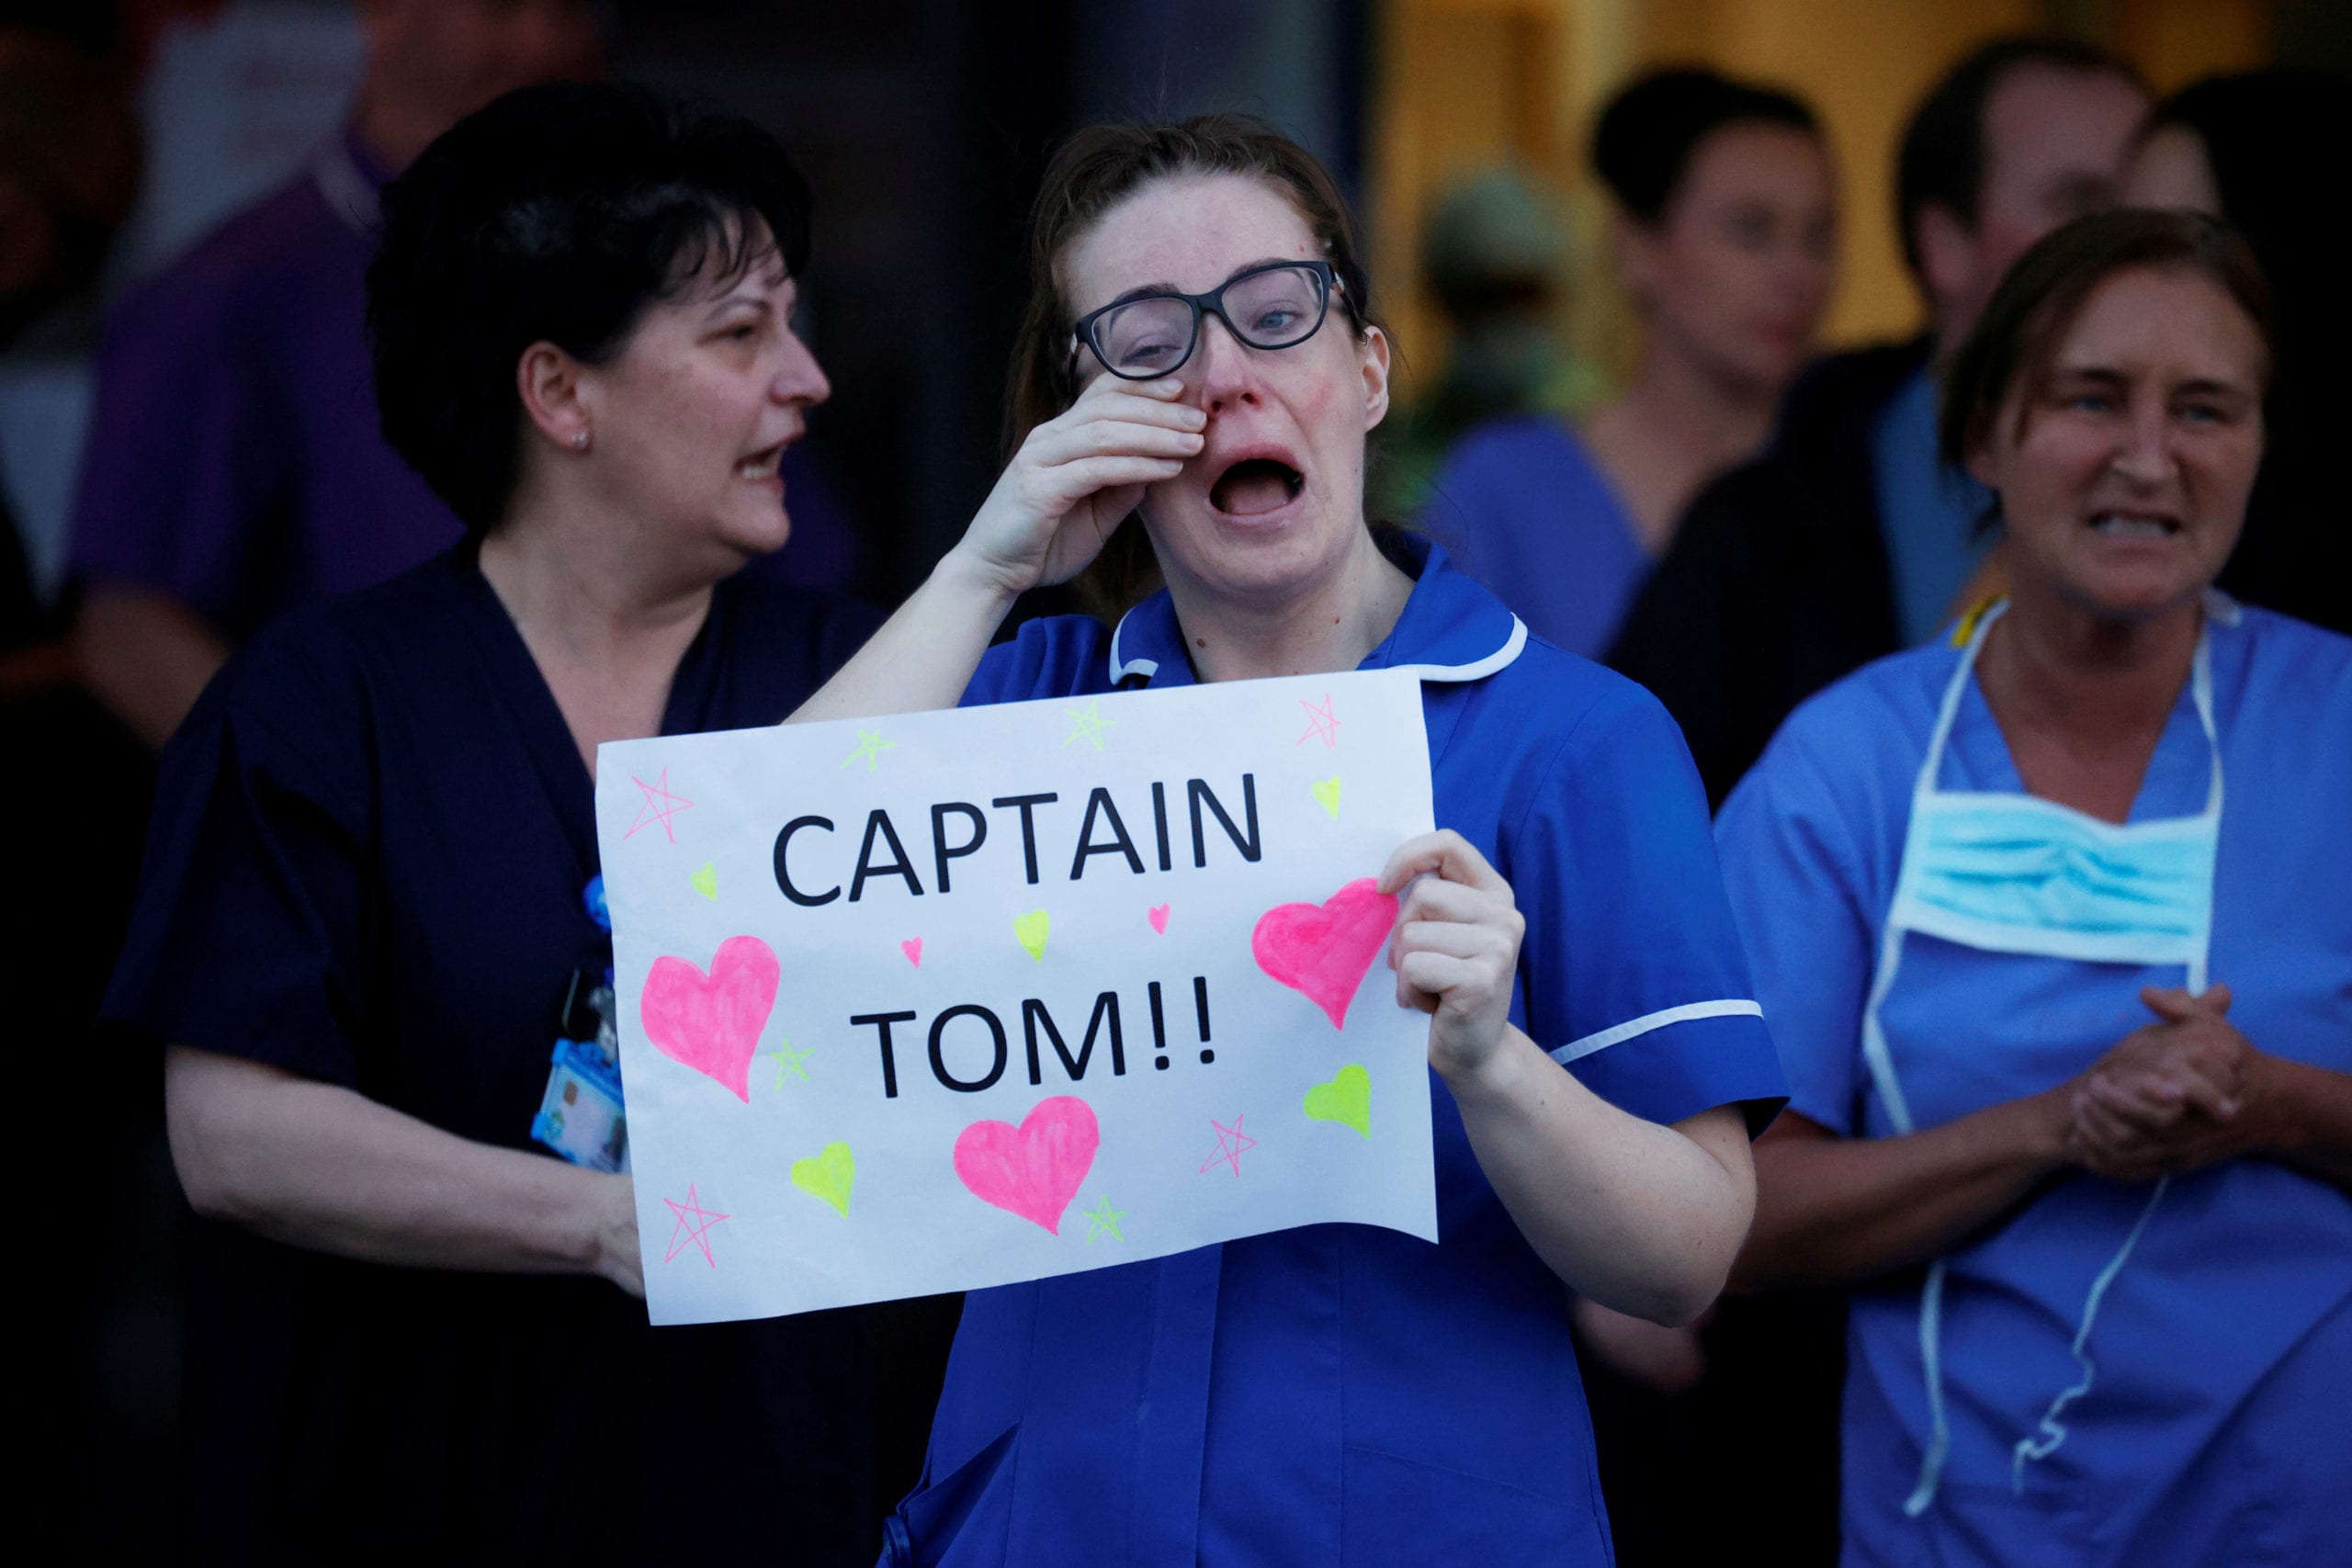 A crying NHS worker holds a message from Captain Tom outside the Aintree University Hospital during the Clap for our Carers campaign in support of the NHS as the spread of the coronavirus disease (COVID-19) continues, Liverpool, Britain, April 16, 2020. REUTERS/Phil Noble